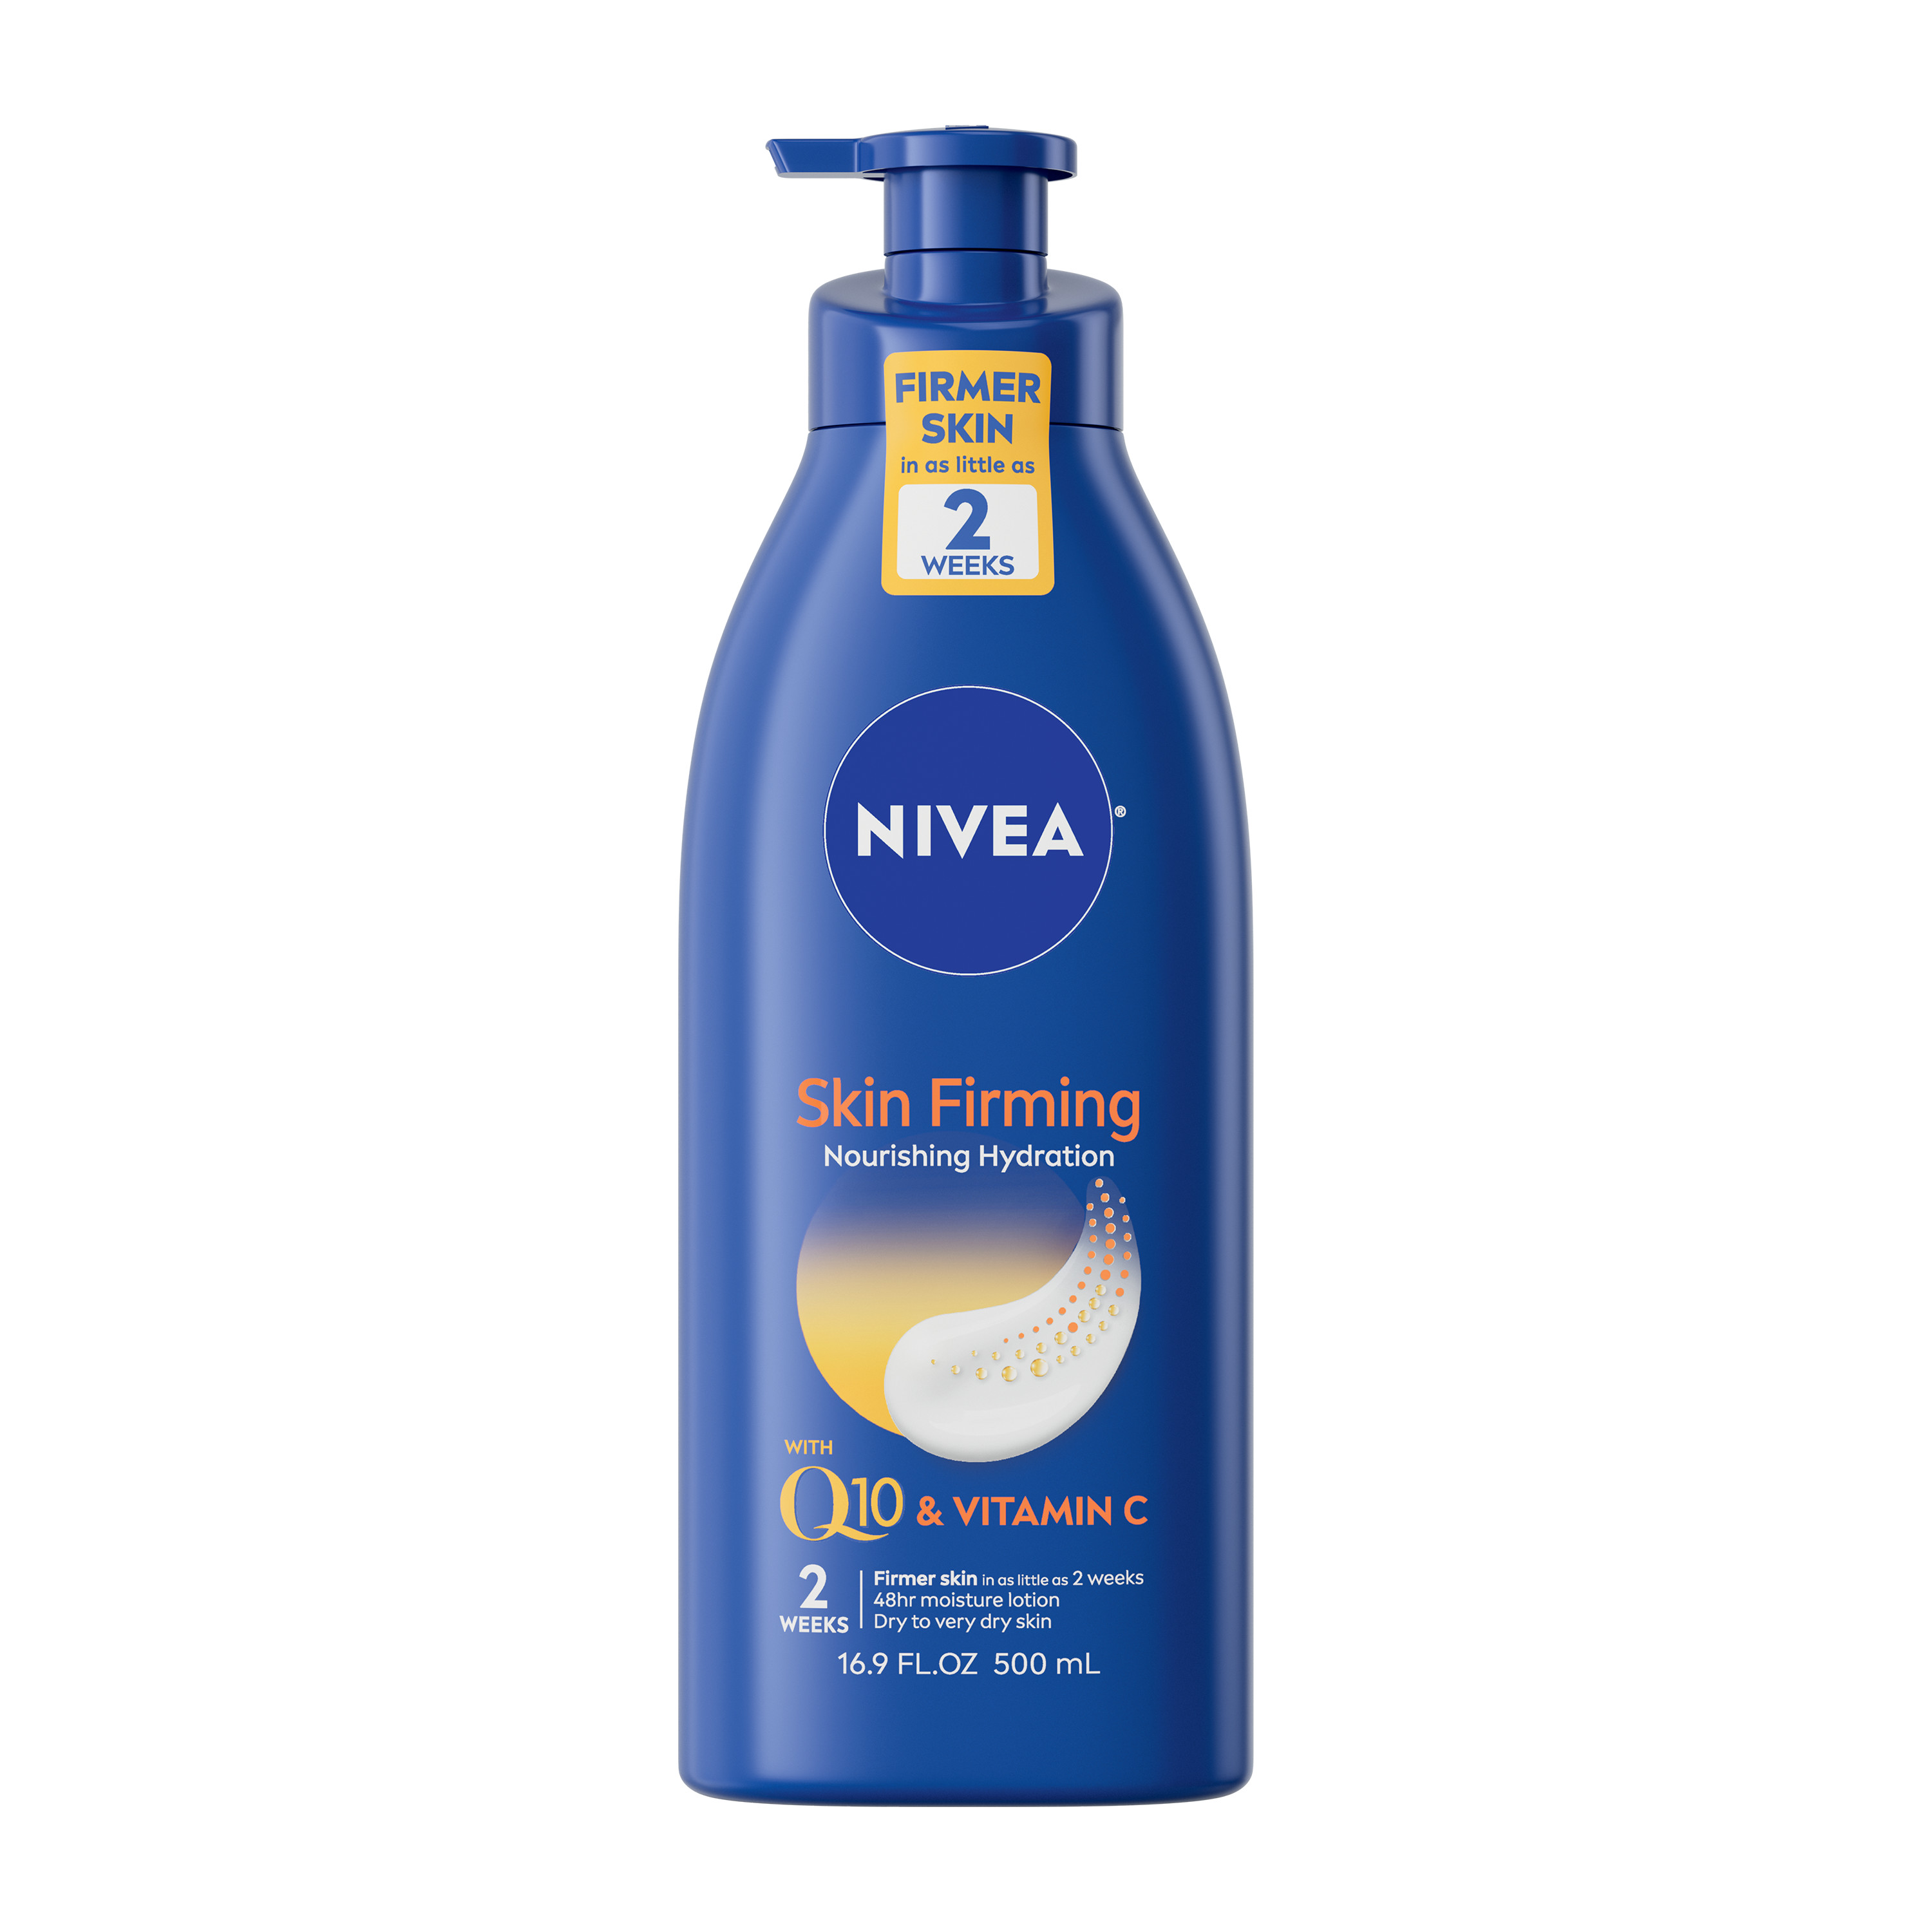 NIVEA Nourishing Skin Firming Body Lotion with Q10 and Vitamin C, 16.9 Fl Oz Pump Bottle - image 3 of 14